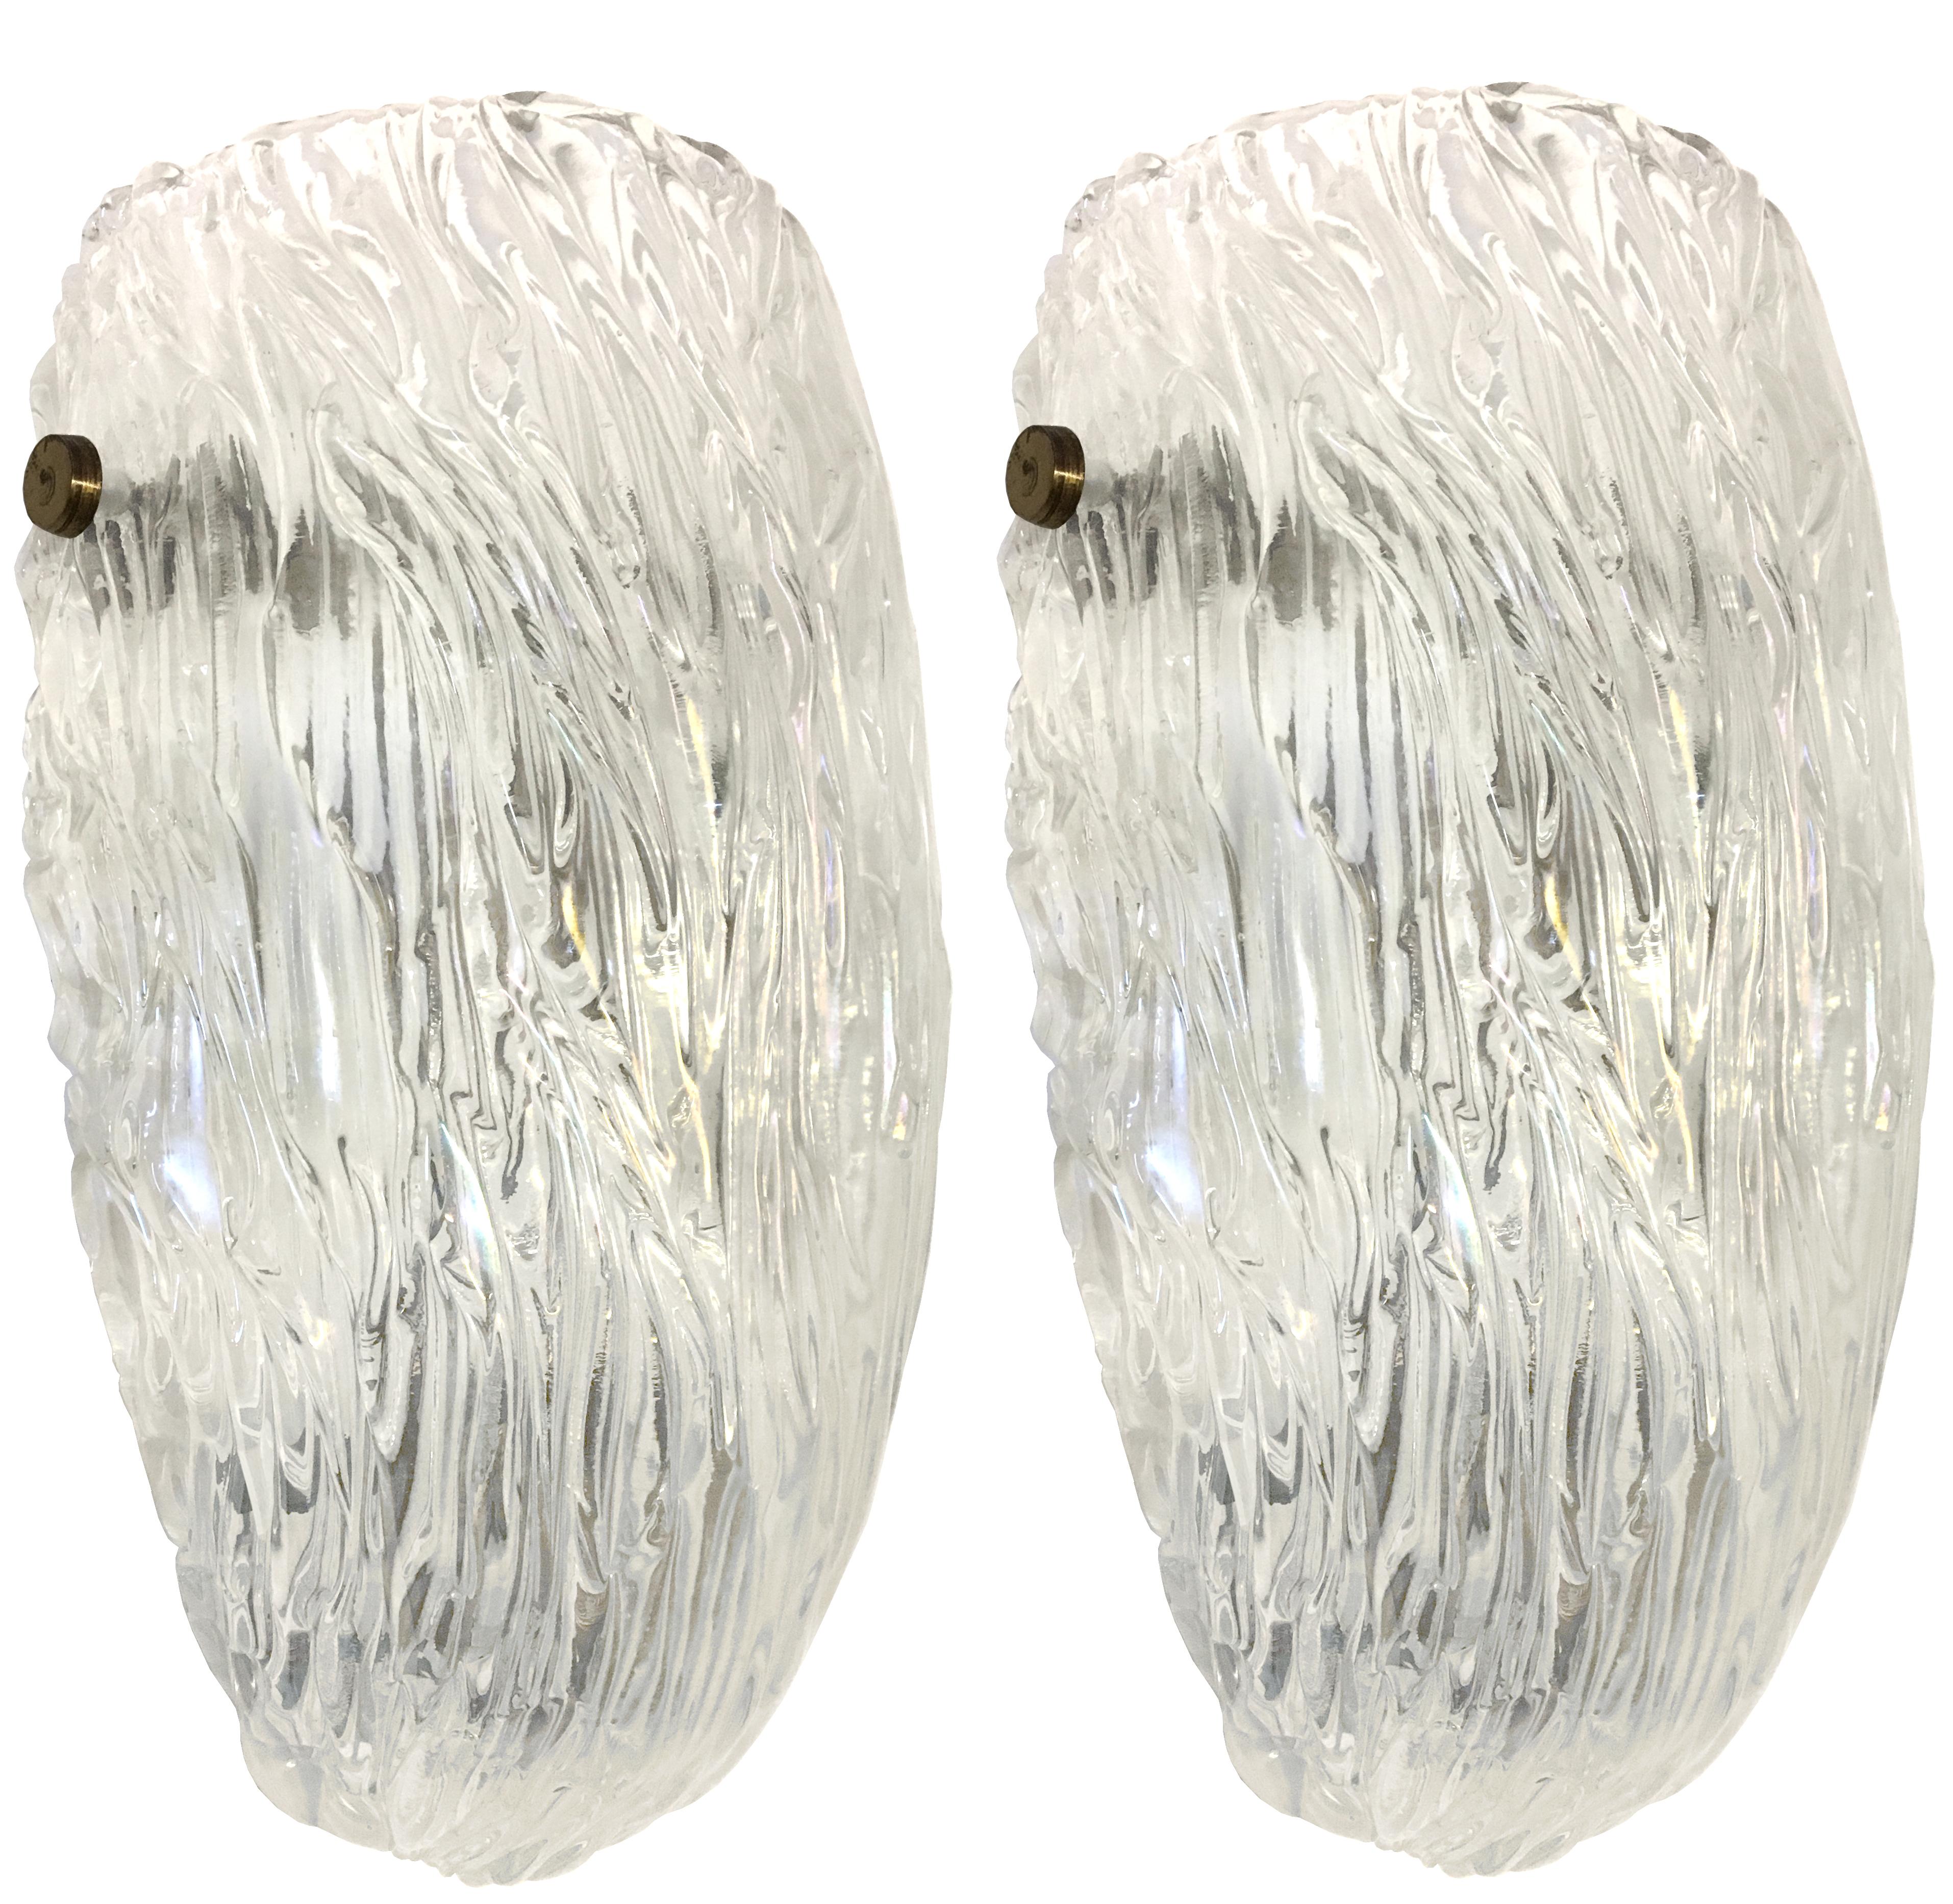 Pair of Textured Glass Sconces by Barovier In Excellent Condition For Sale In New York, NY